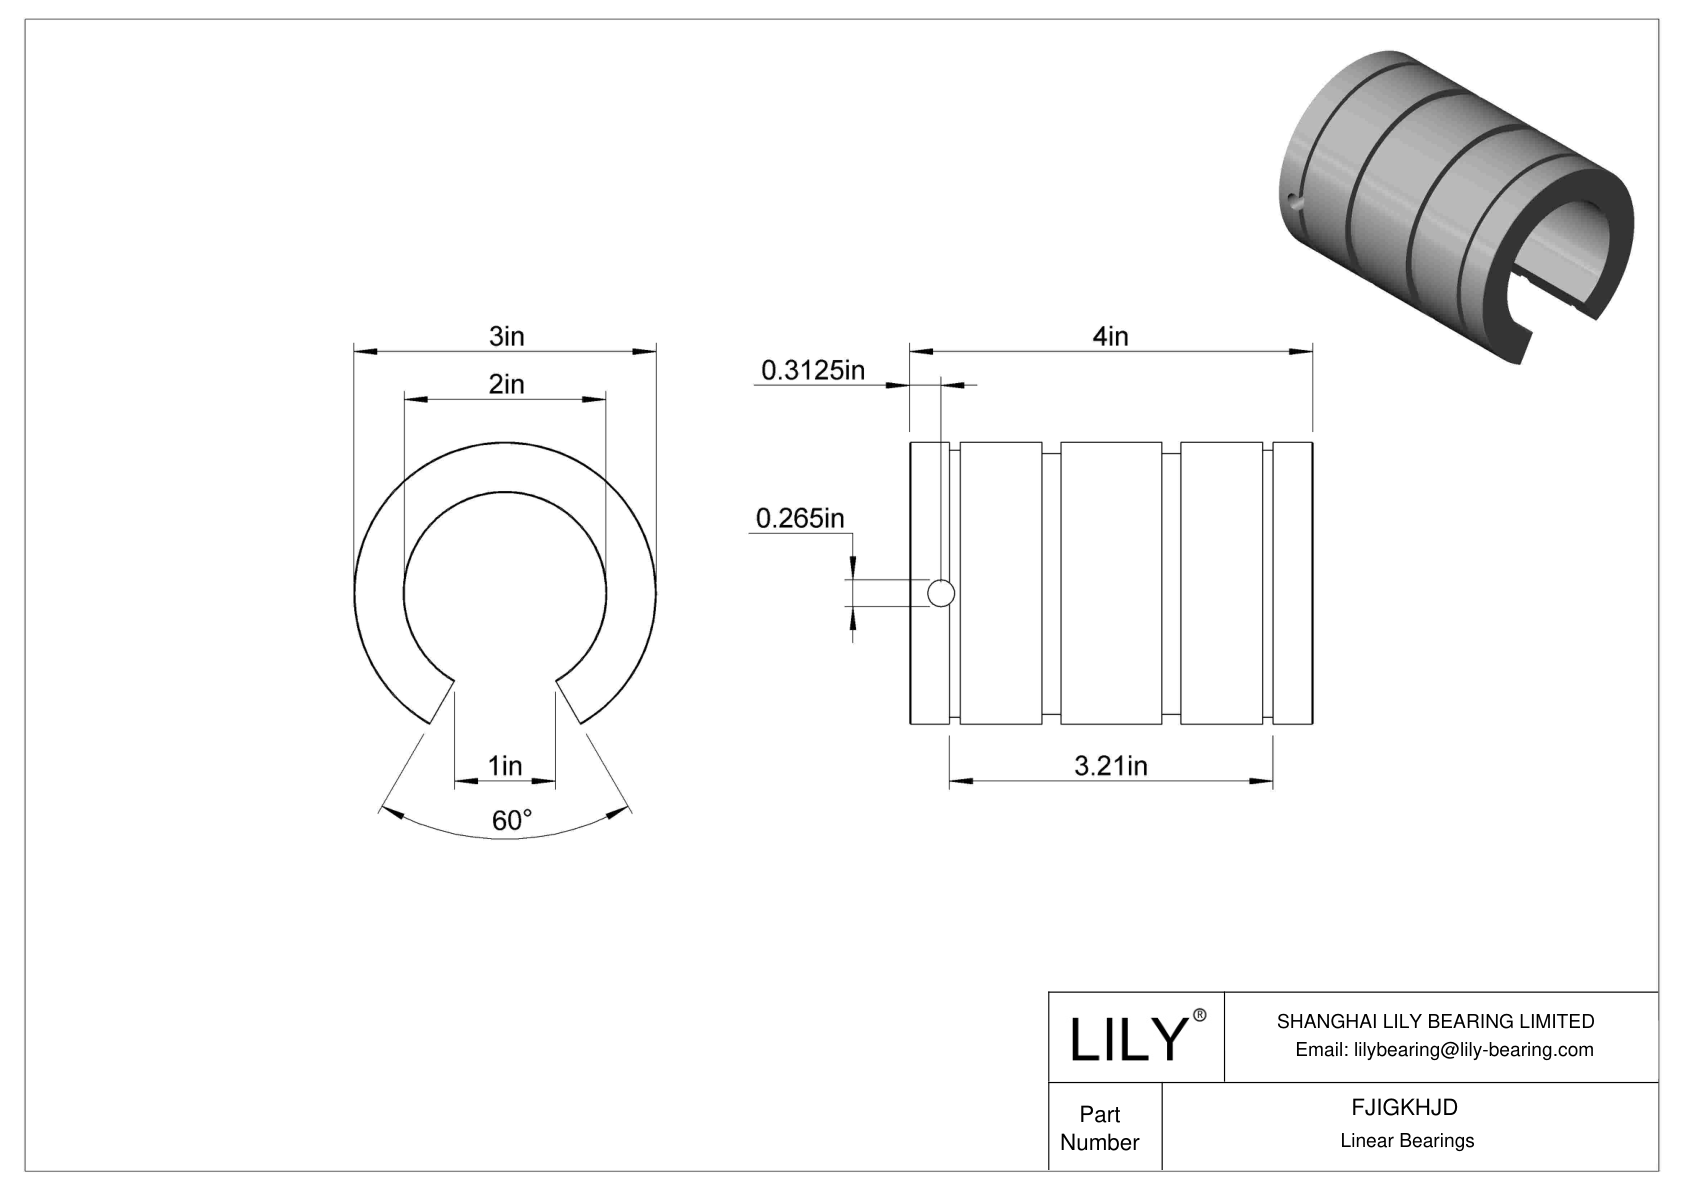 FJIGKHJD Common Linear Sleeve Bearings for Support Rail Shafts cad drawing